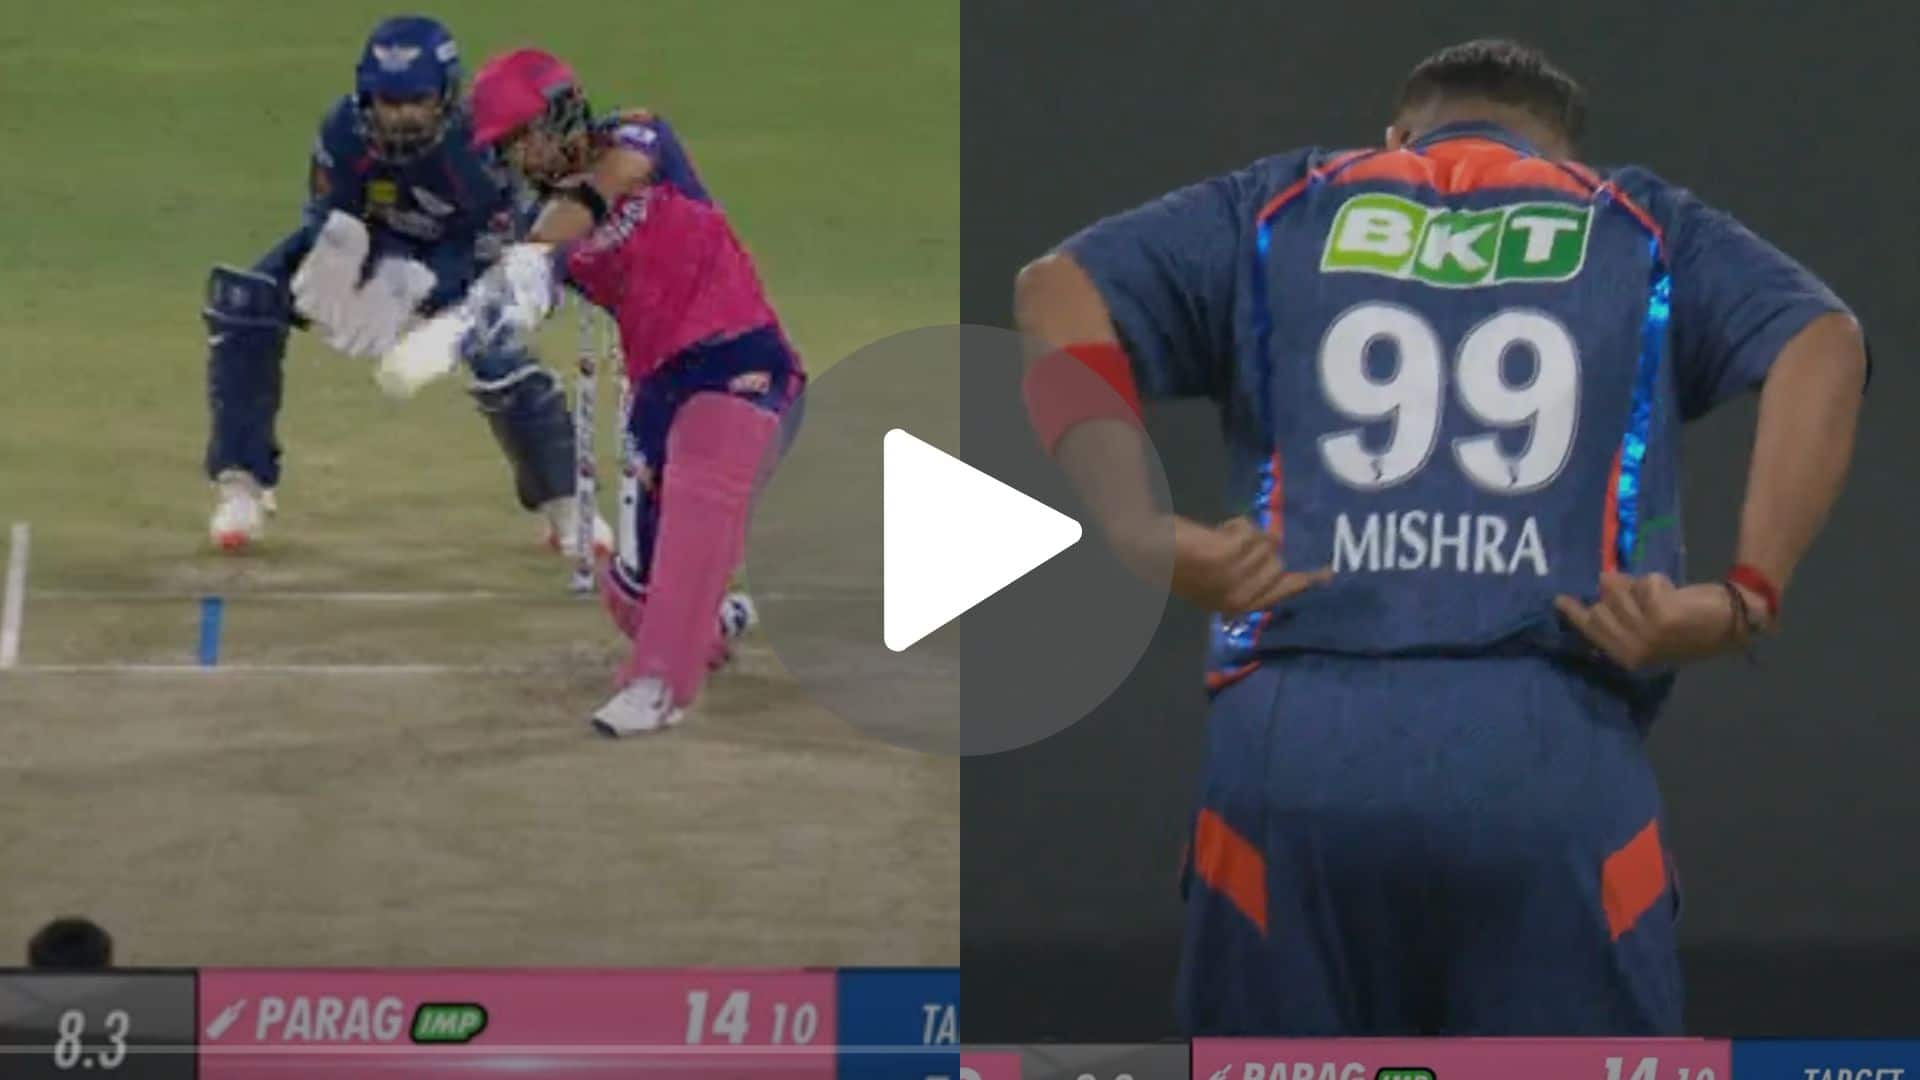 [Watch] 6 And Out! Riyan Parag Throws It Away As RR Sink Further vs LSG